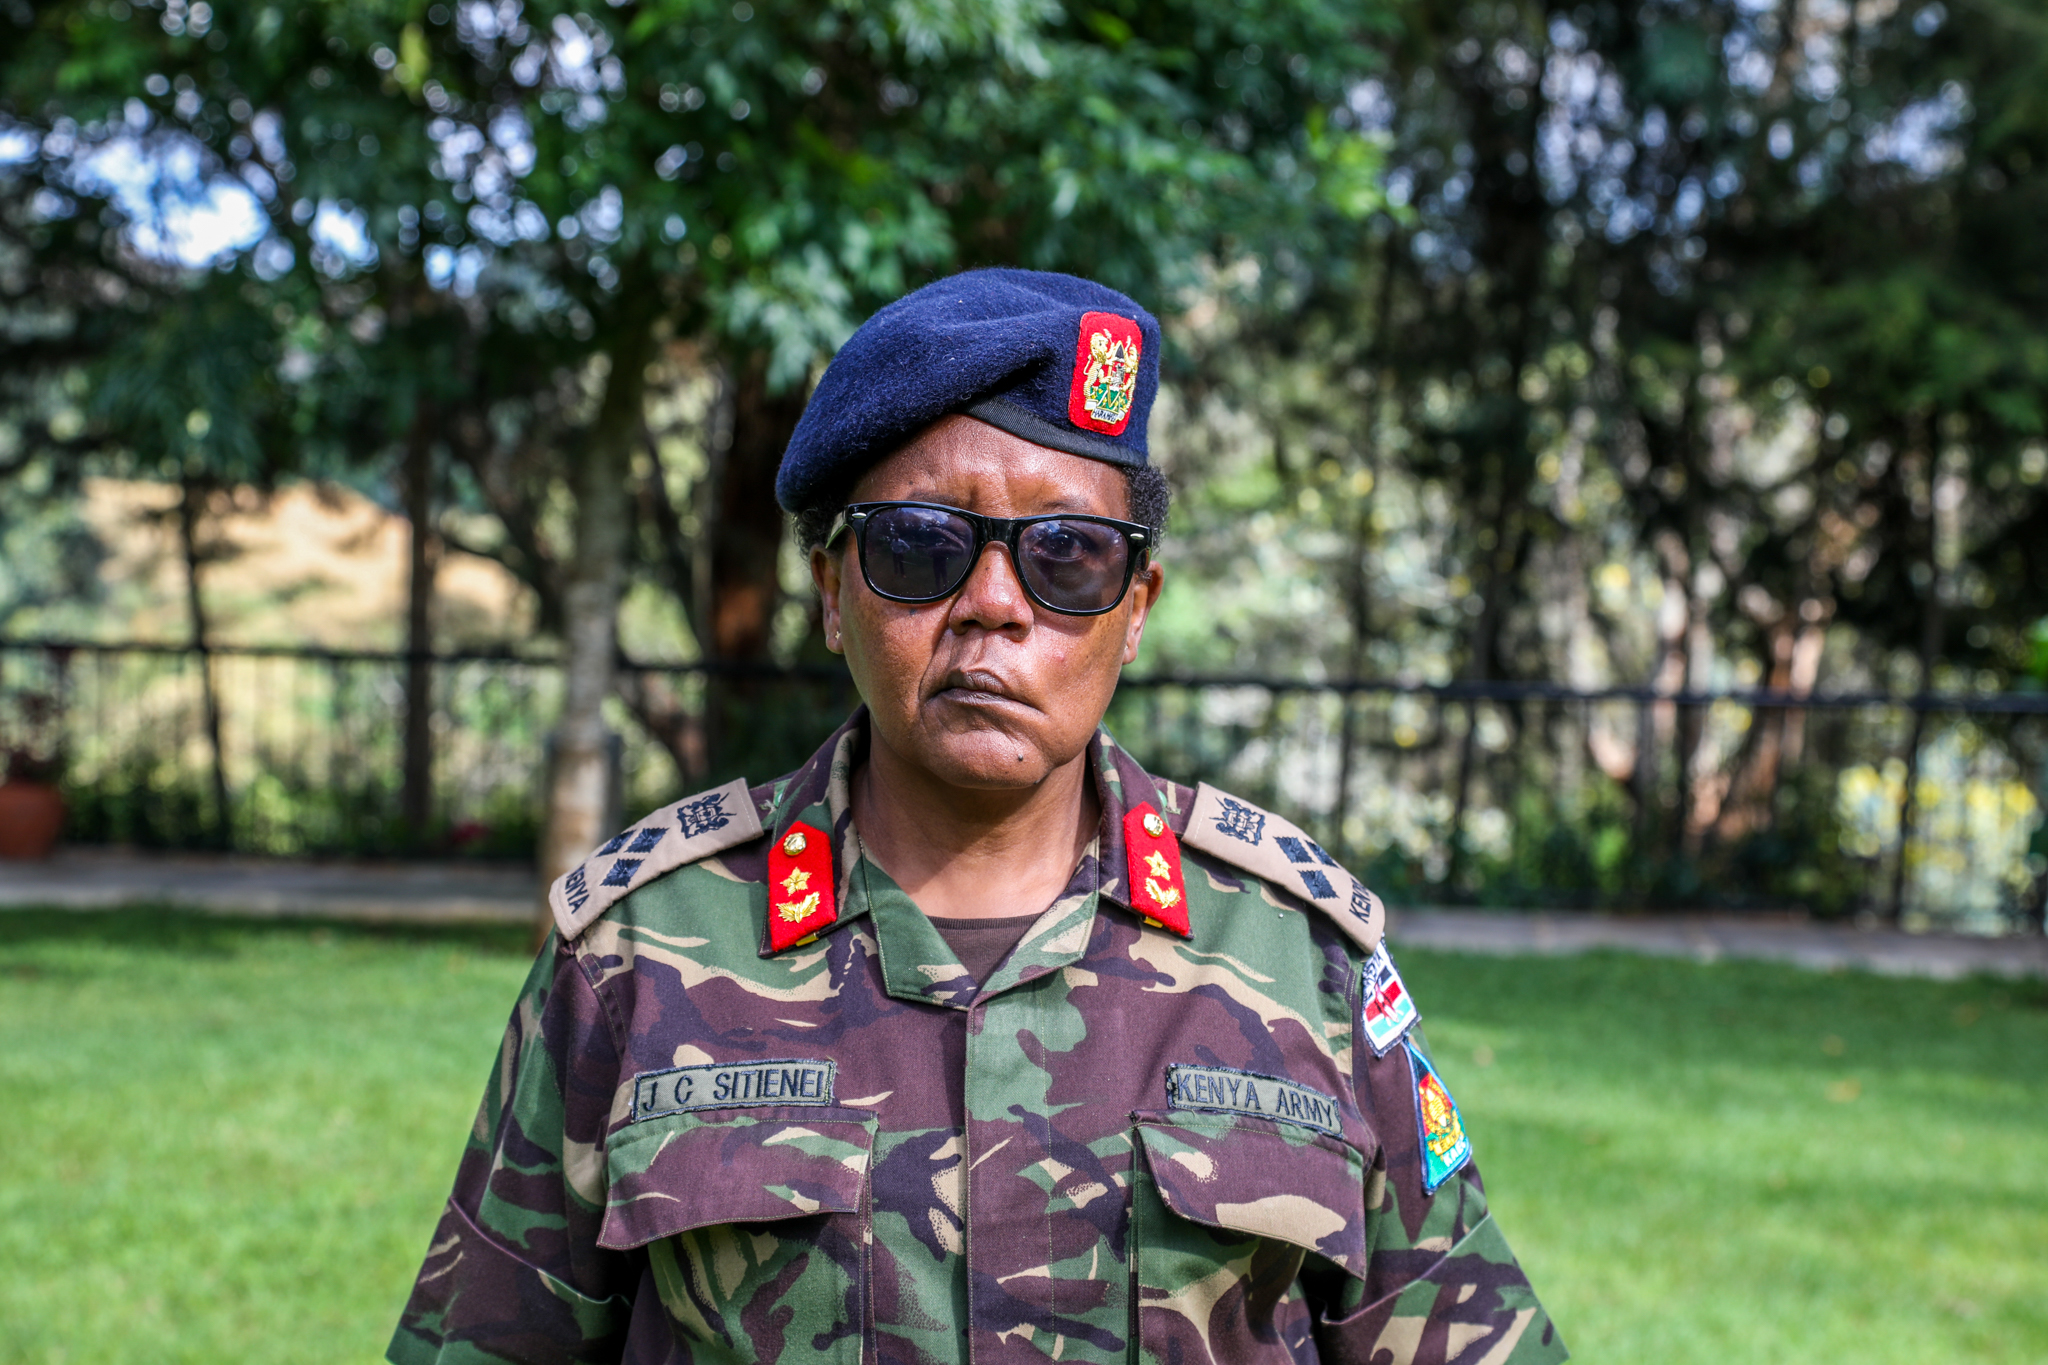 She started as an education officer who changed careers from education to join the military. She was a UN Observe in the DRC conflict, she has extensive gender training and is an active gender mainstreaming facilitator at the Ministry of Defence.